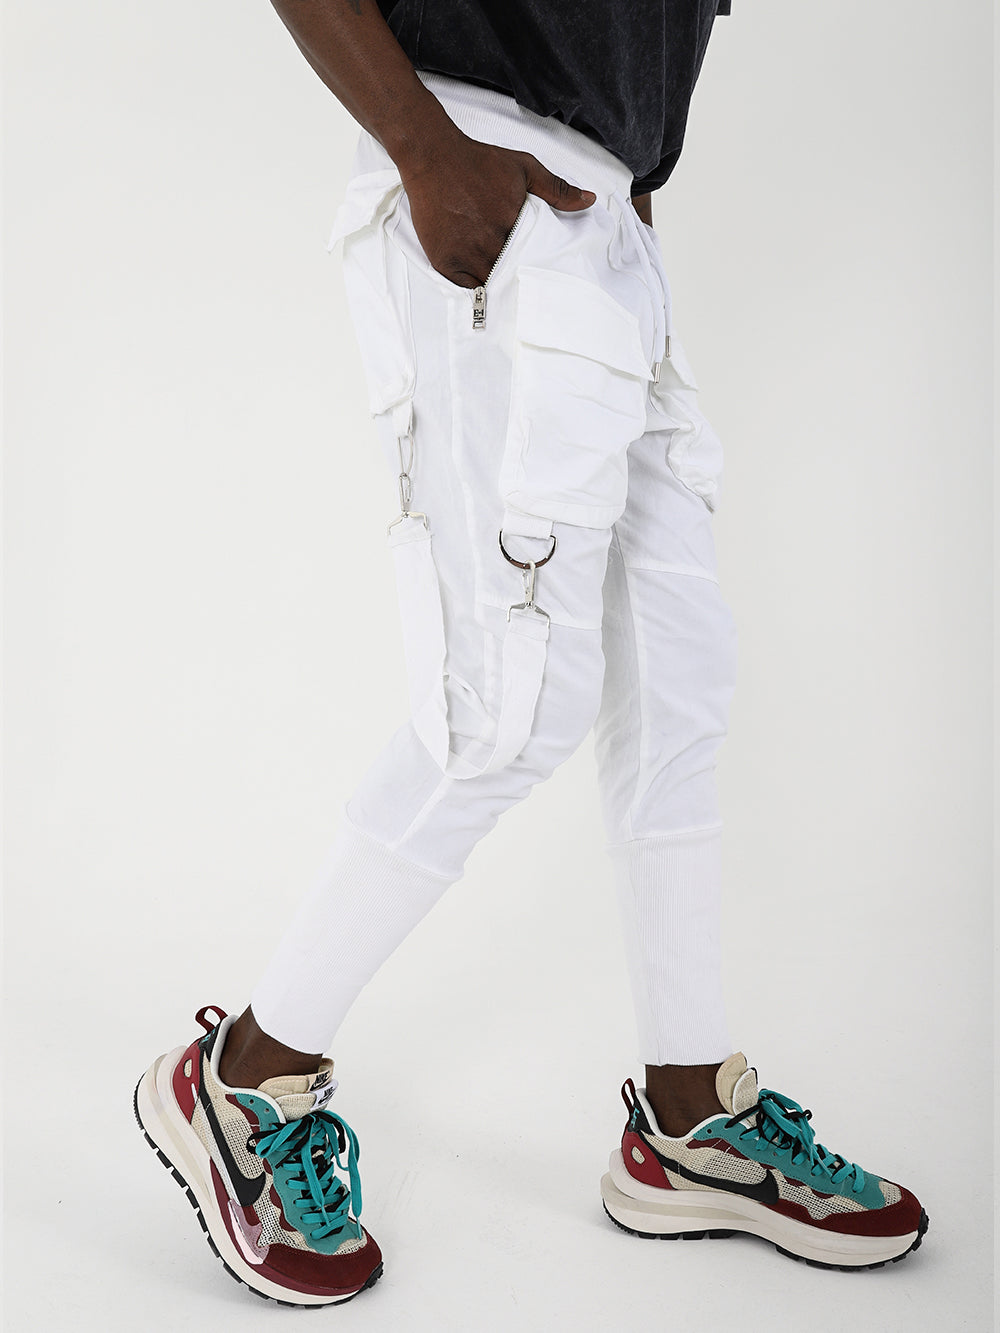 A man wearing BROOKLYN JOGGERS with adjustable drawstring waist and sneakers.